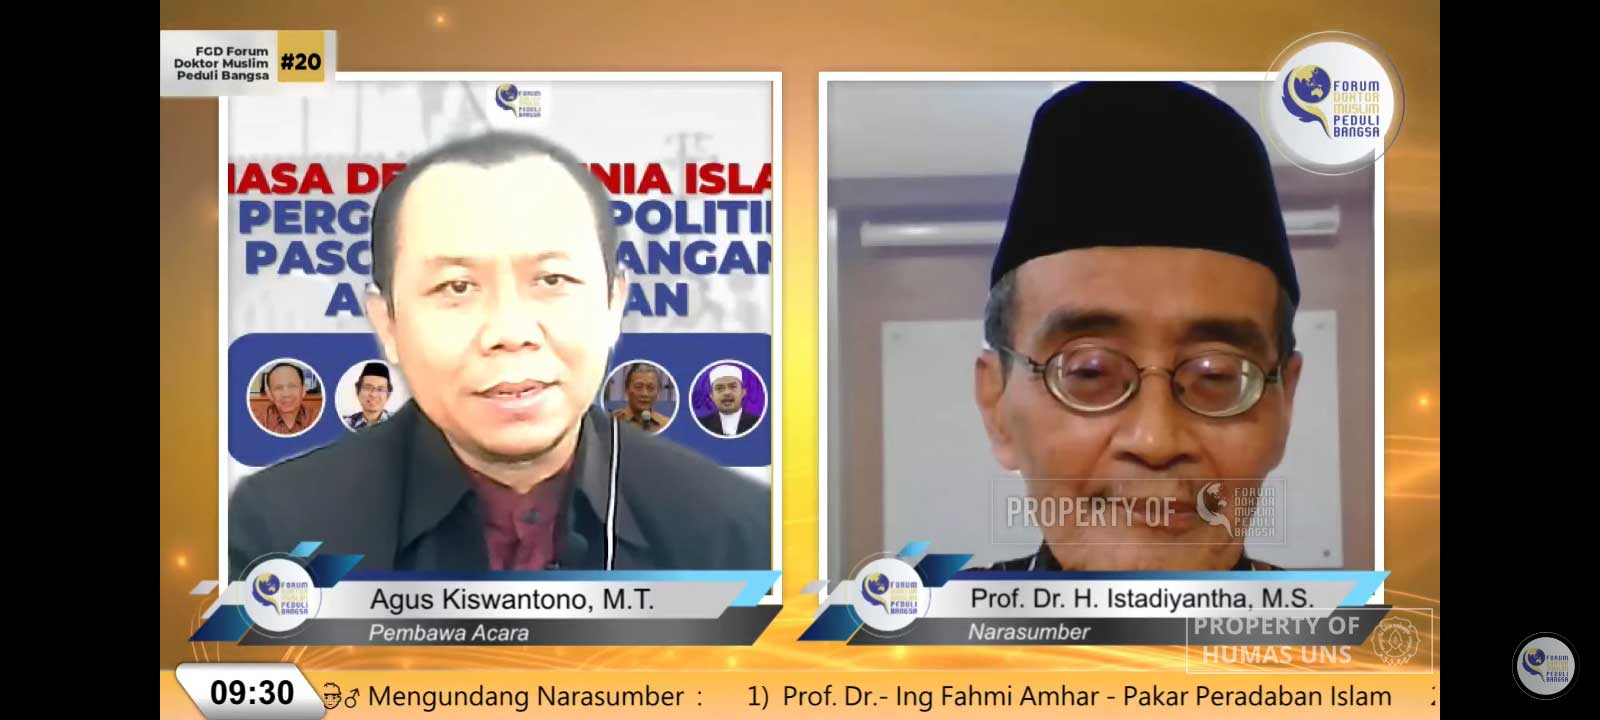 Professor in Middle East Studies UNS Taliban Victory Does Not Affect Indonesia’s Politic